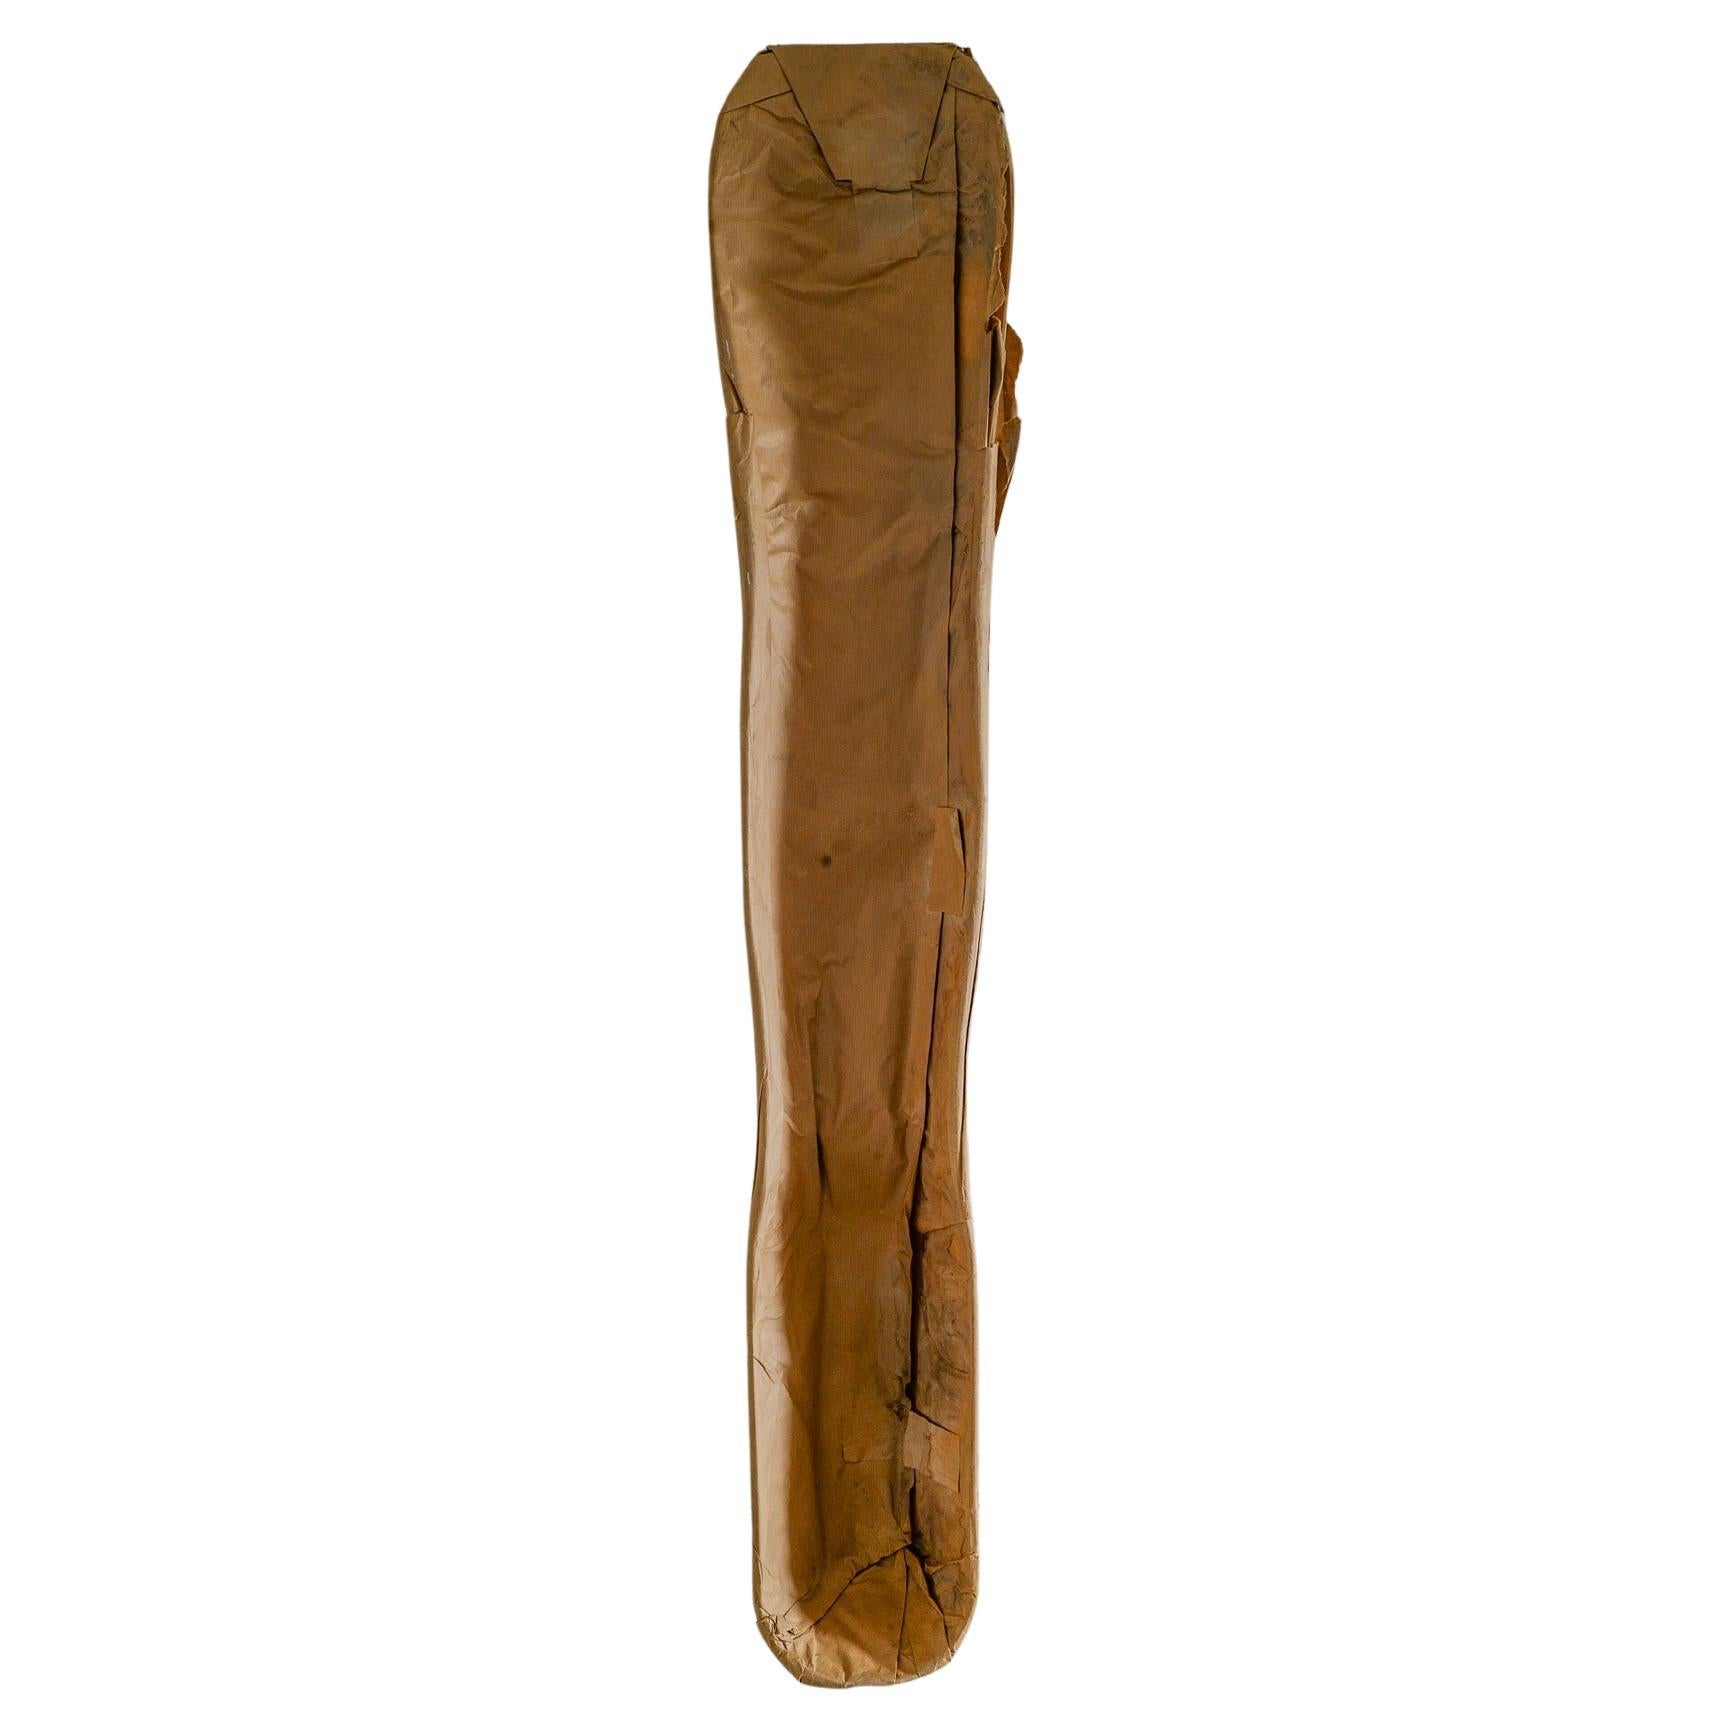 Original Charles & Ray Eames Mid Century Leg Splint in Molded Plywood, 1943 For Sale